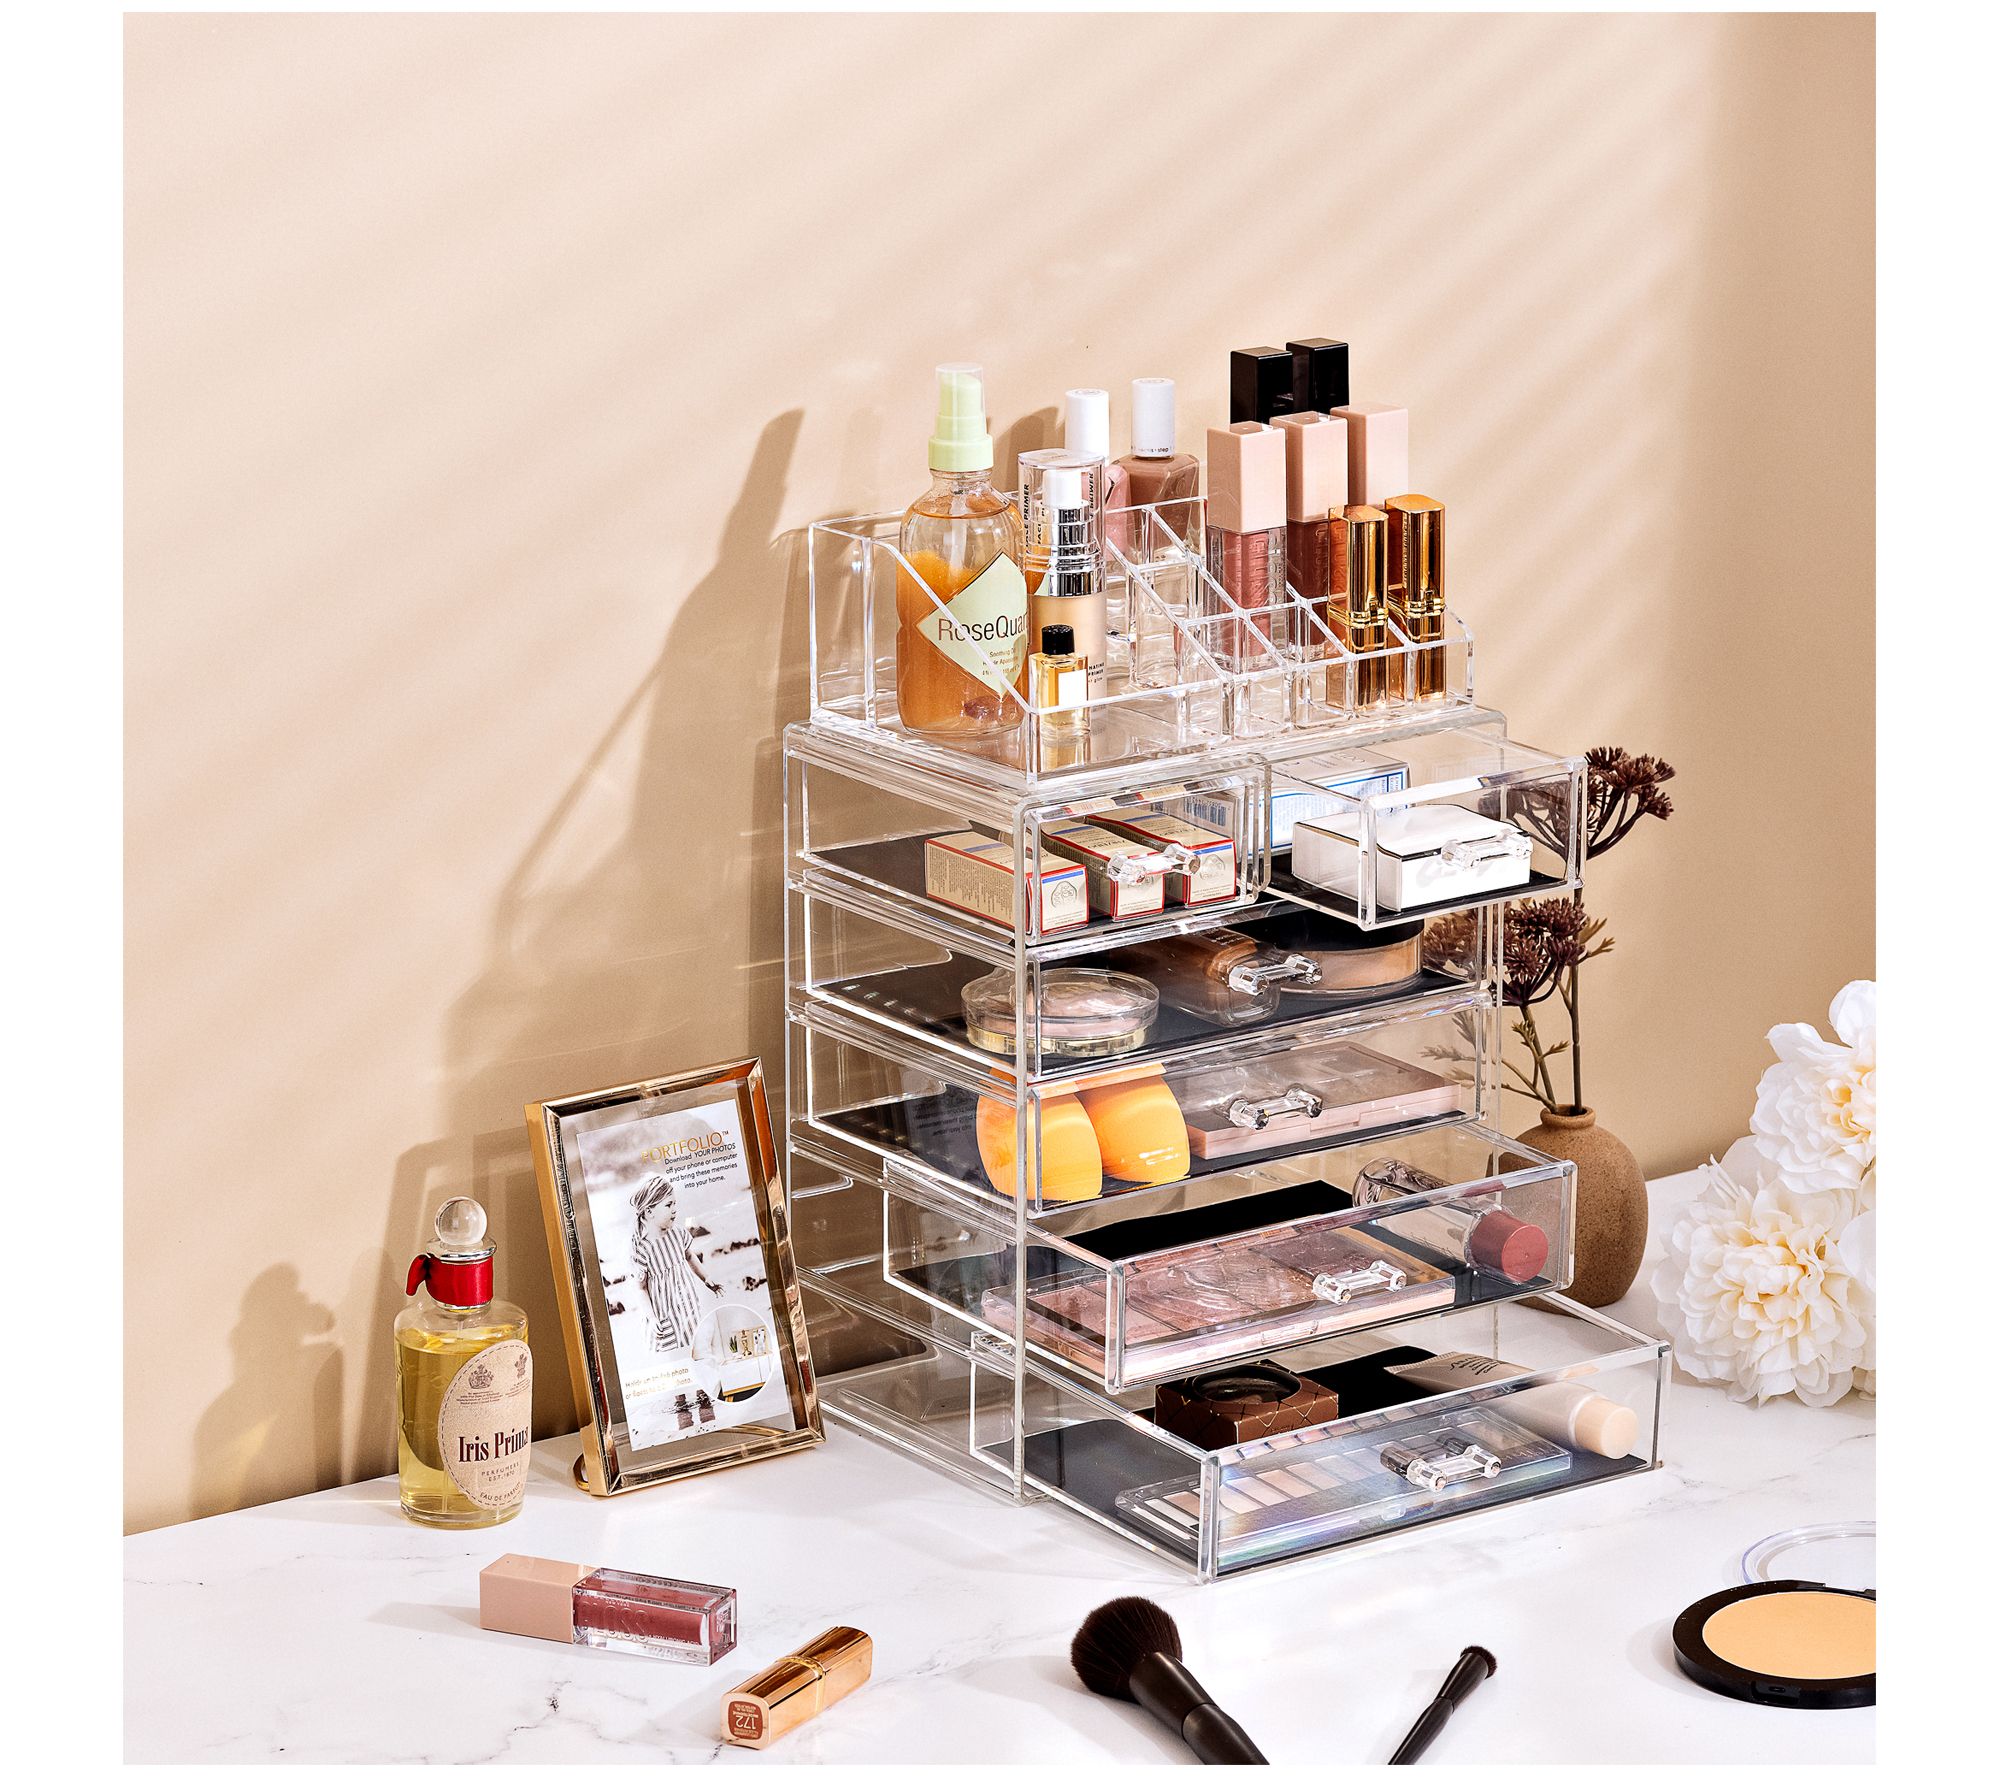 Sorbus Makeup and Jewelry Storage Case